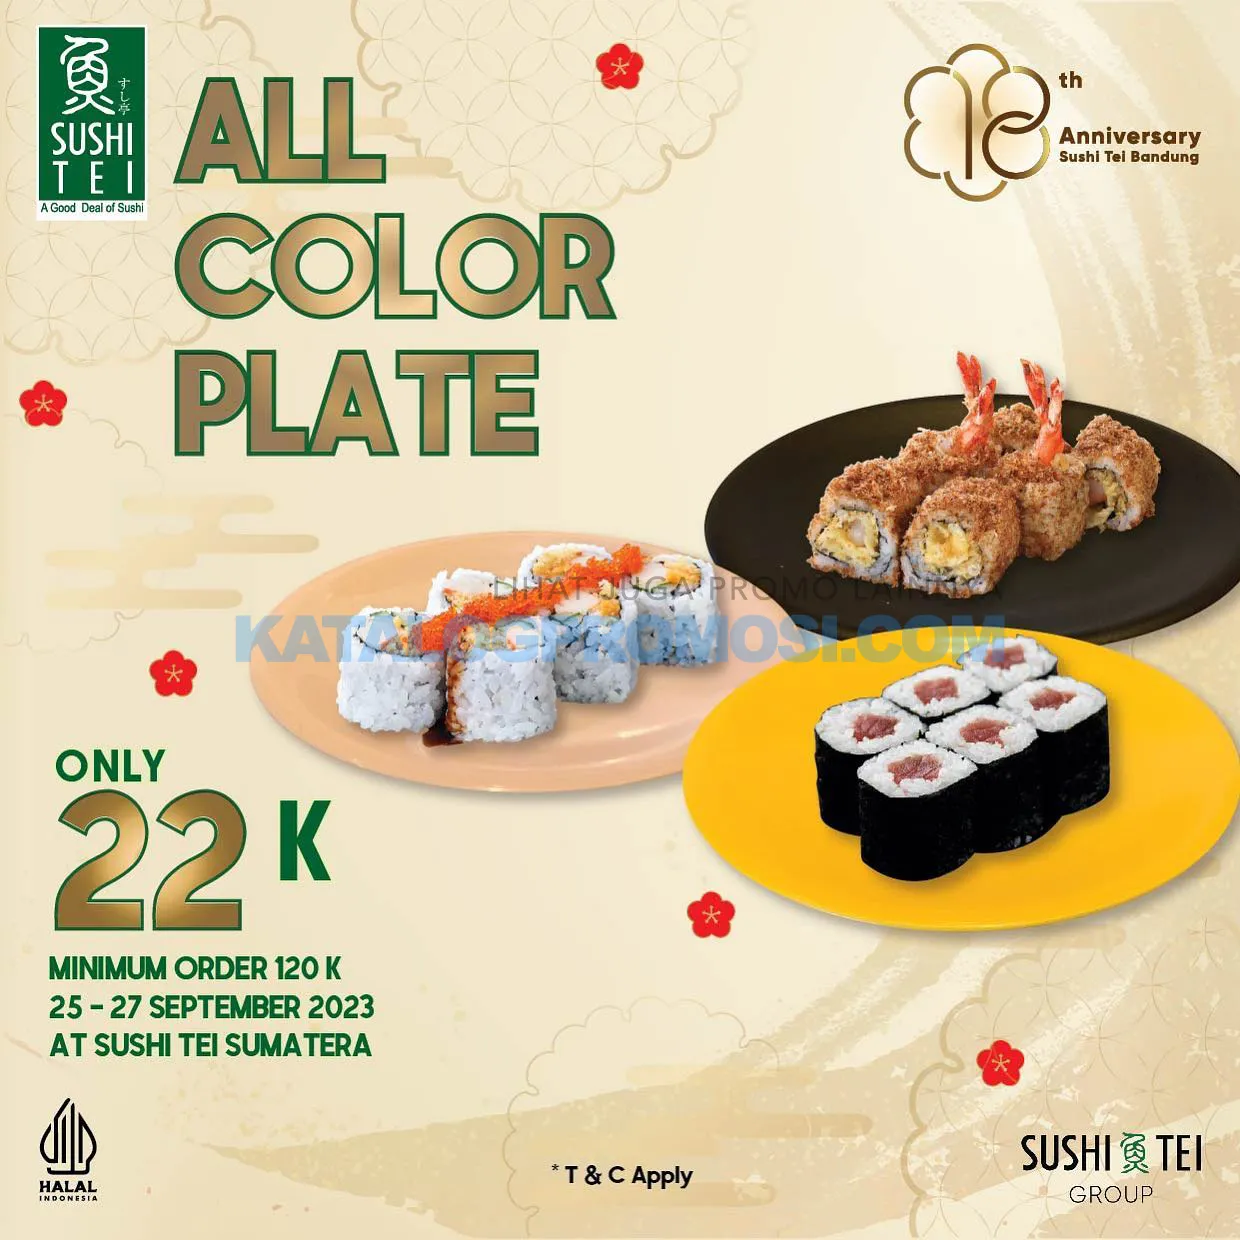 Promo Sushi Tei Sumatera - ALL COLOR PLATE Only Rp. 22.000++